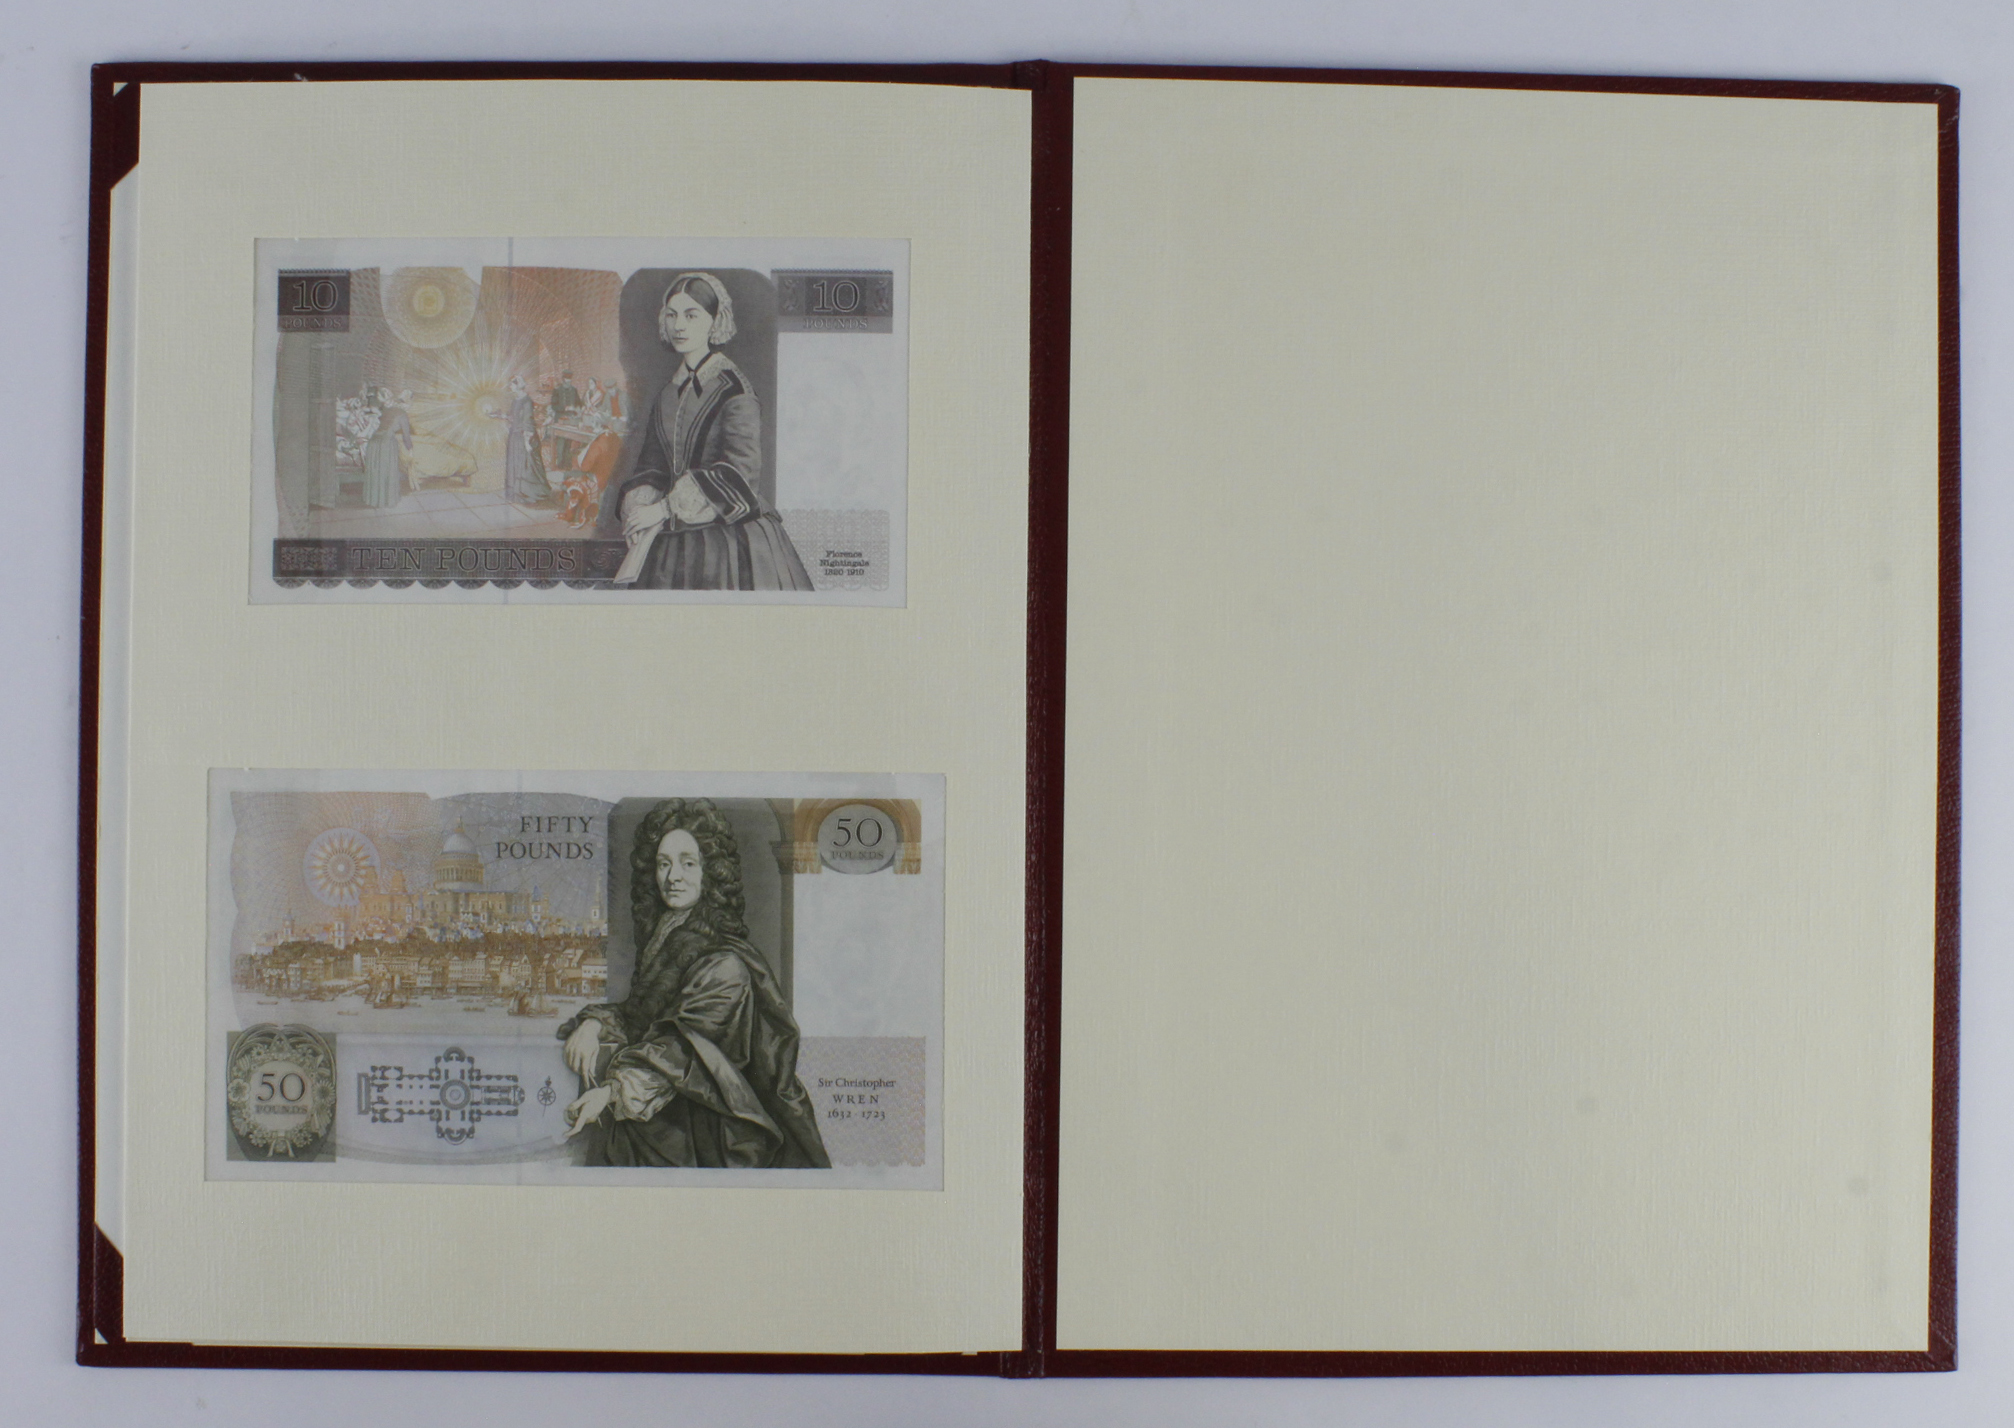 Debden set C106 Firsts, a set of 4 notes issued 1993 and signed Kentfield, all FIRST RUN notes - Image 3 of 3